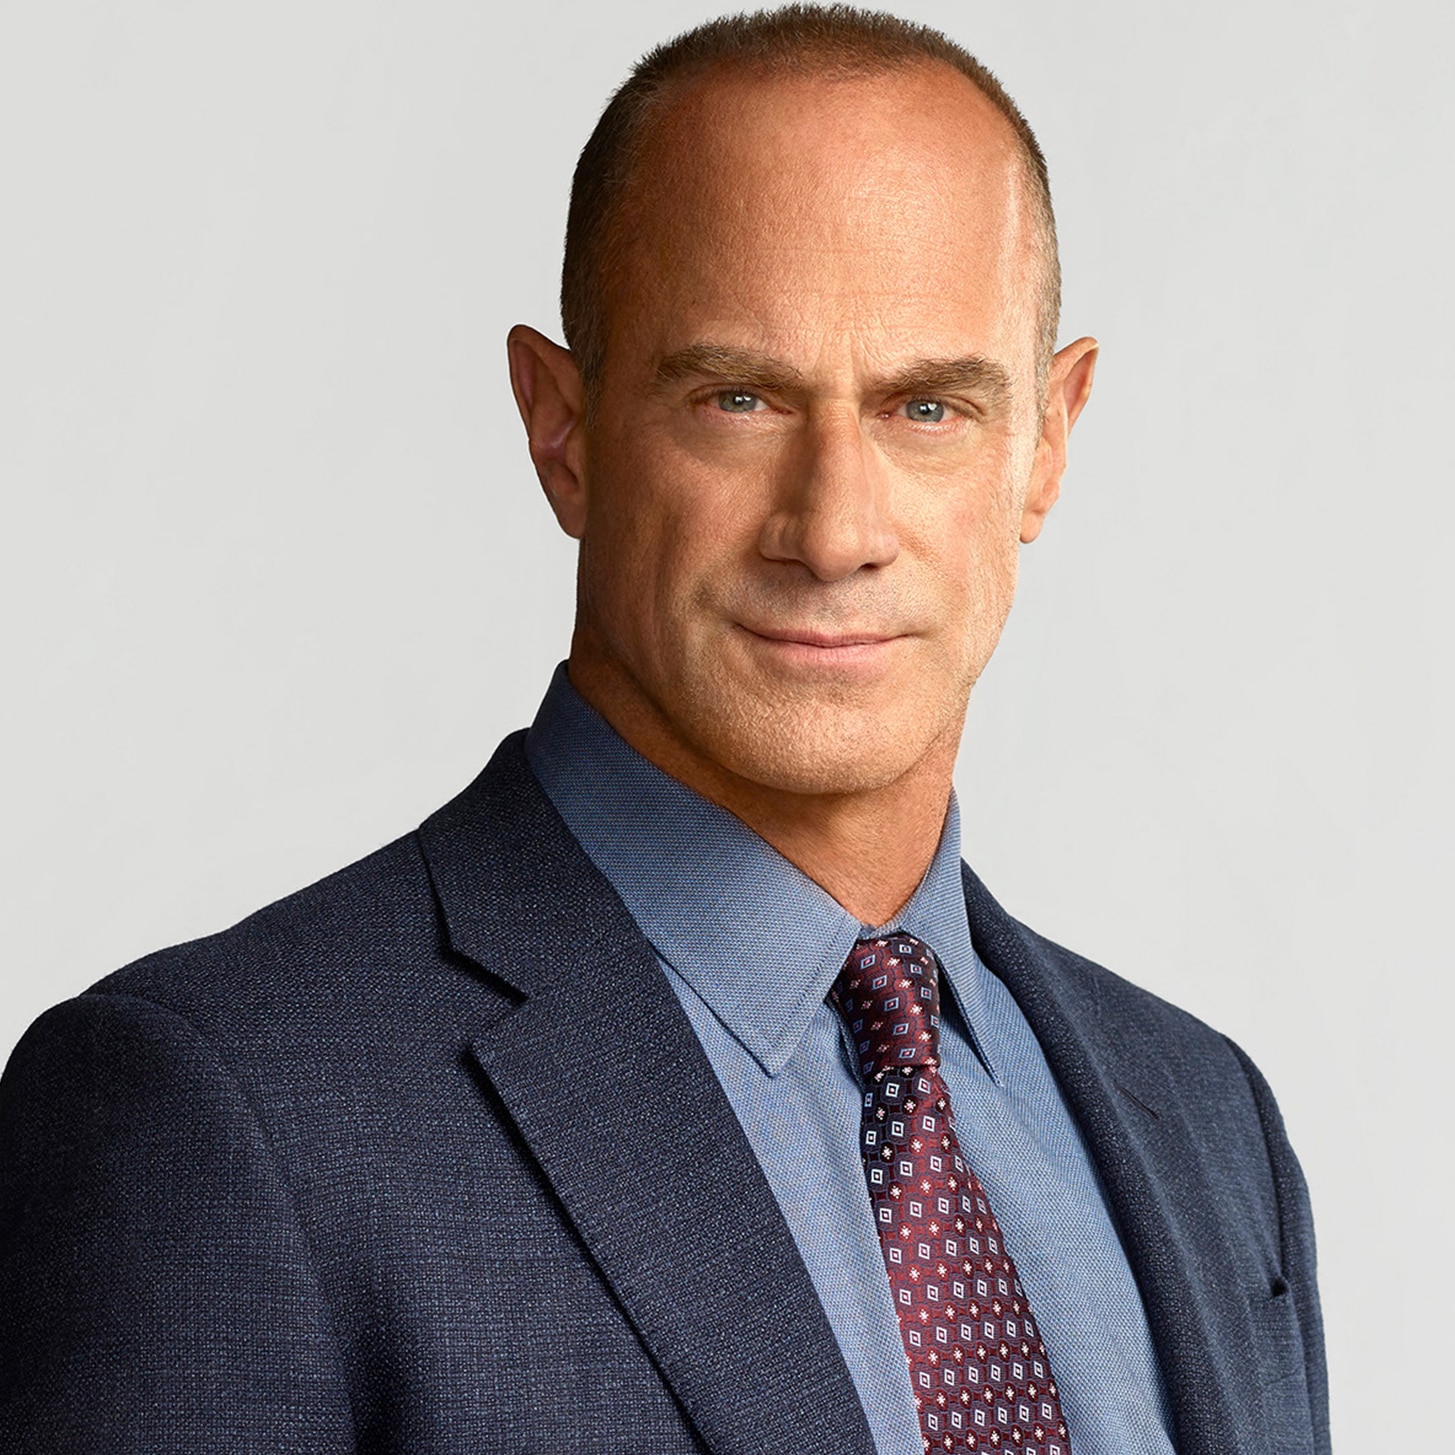 Splits Pose | These Are Their Stories | Chris meloni, Chris, Christopher